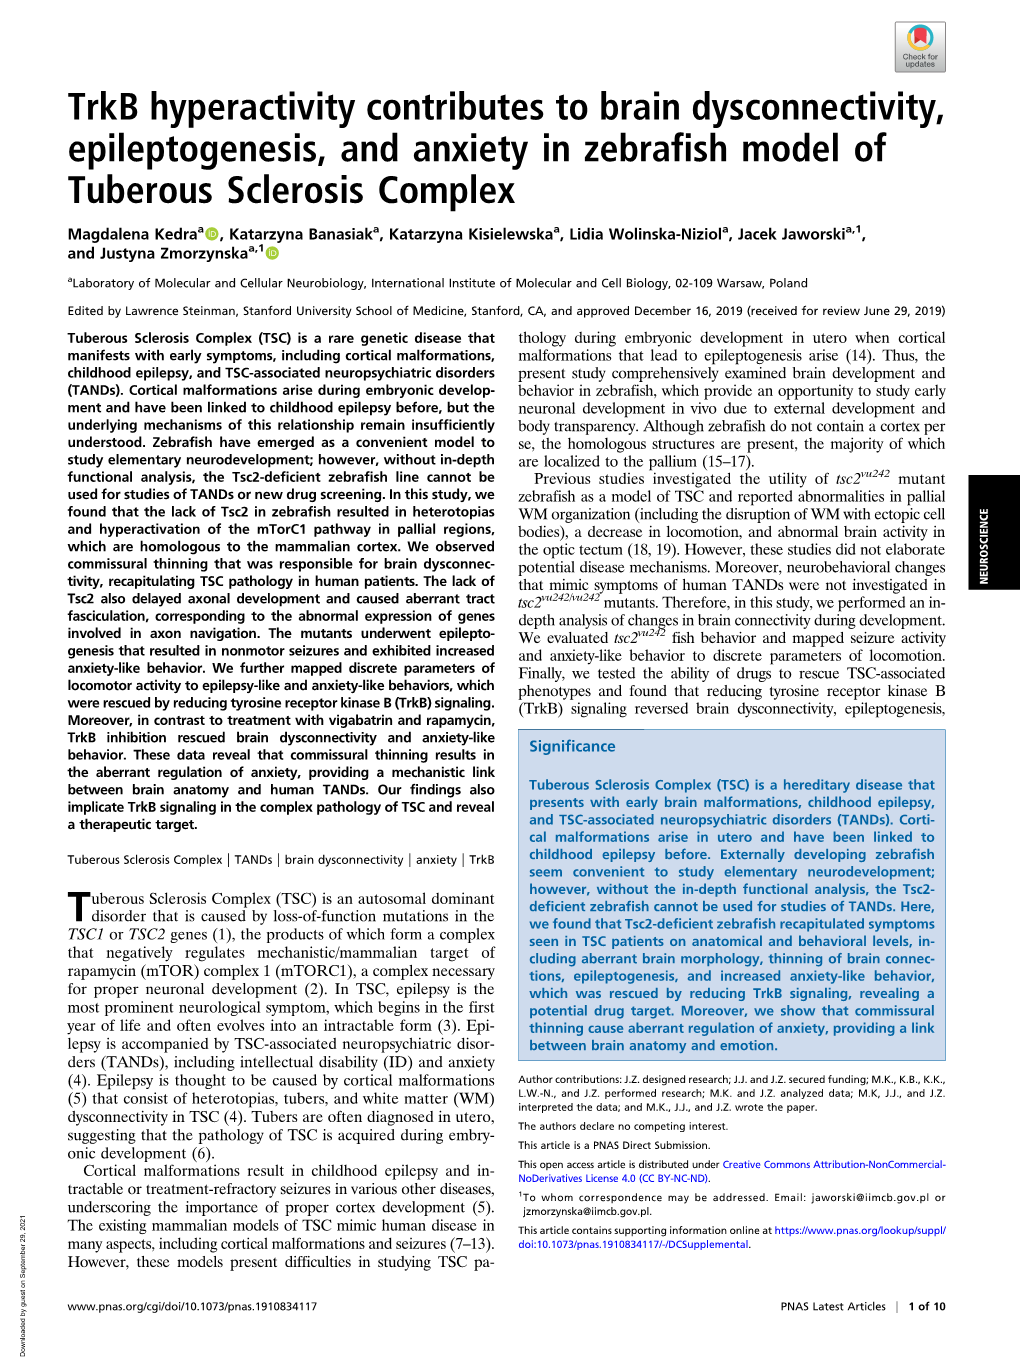 Trkb Hyperactivity Contributes to Brain Dysconnectivity, Epileptogenesis, and Anxiety in Zebrafish Model of Tuberous Sclerosis Complex